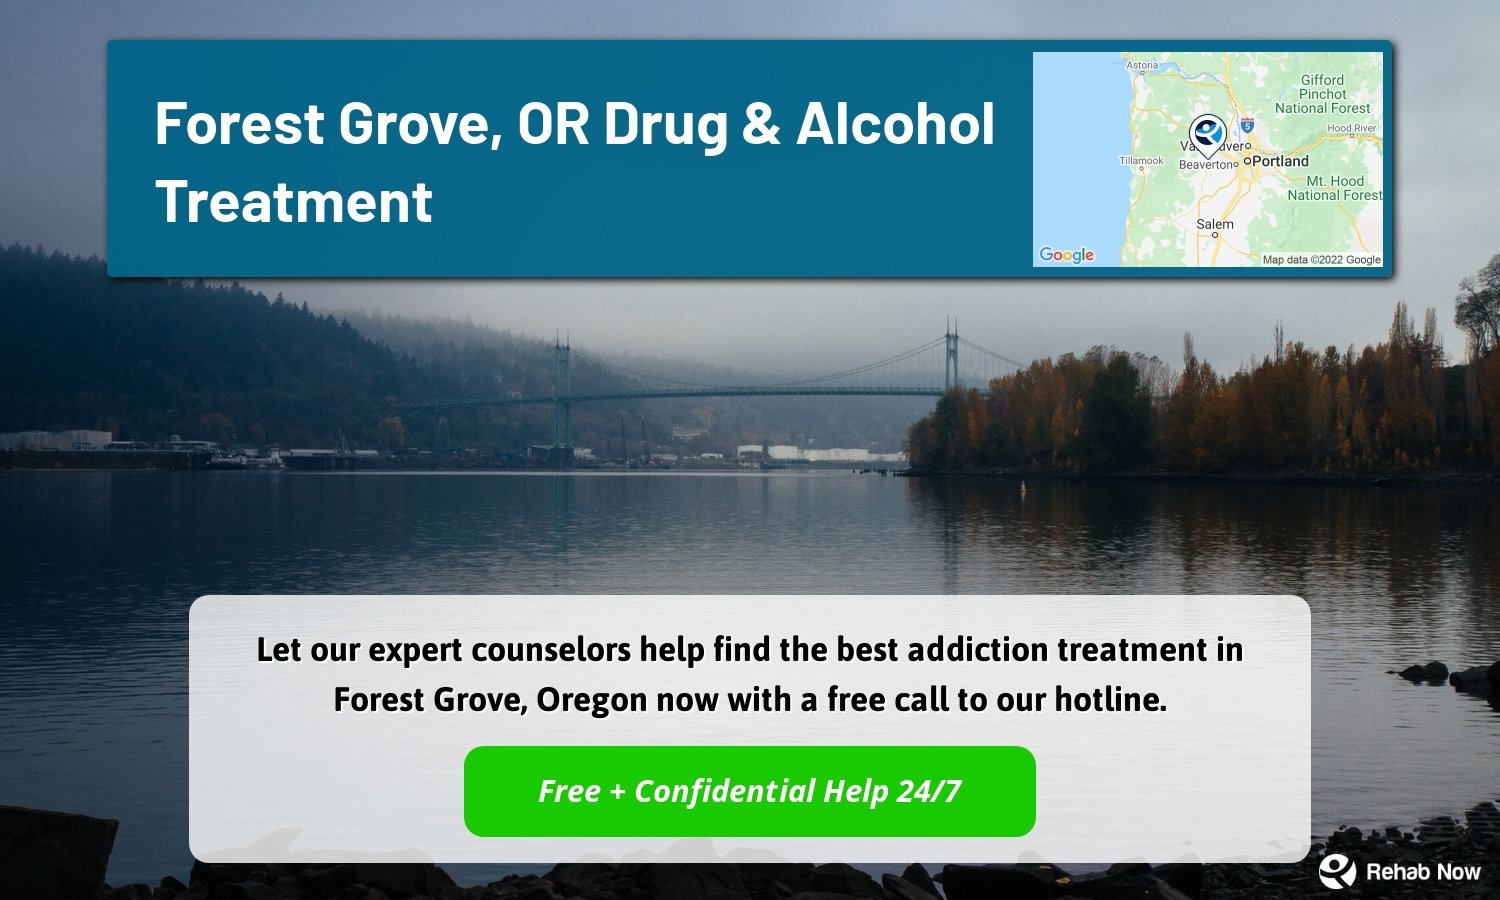 Let our expert counselors help find the best addiction treatment in Forest Grove, Oregon now with a free call to our hotline.